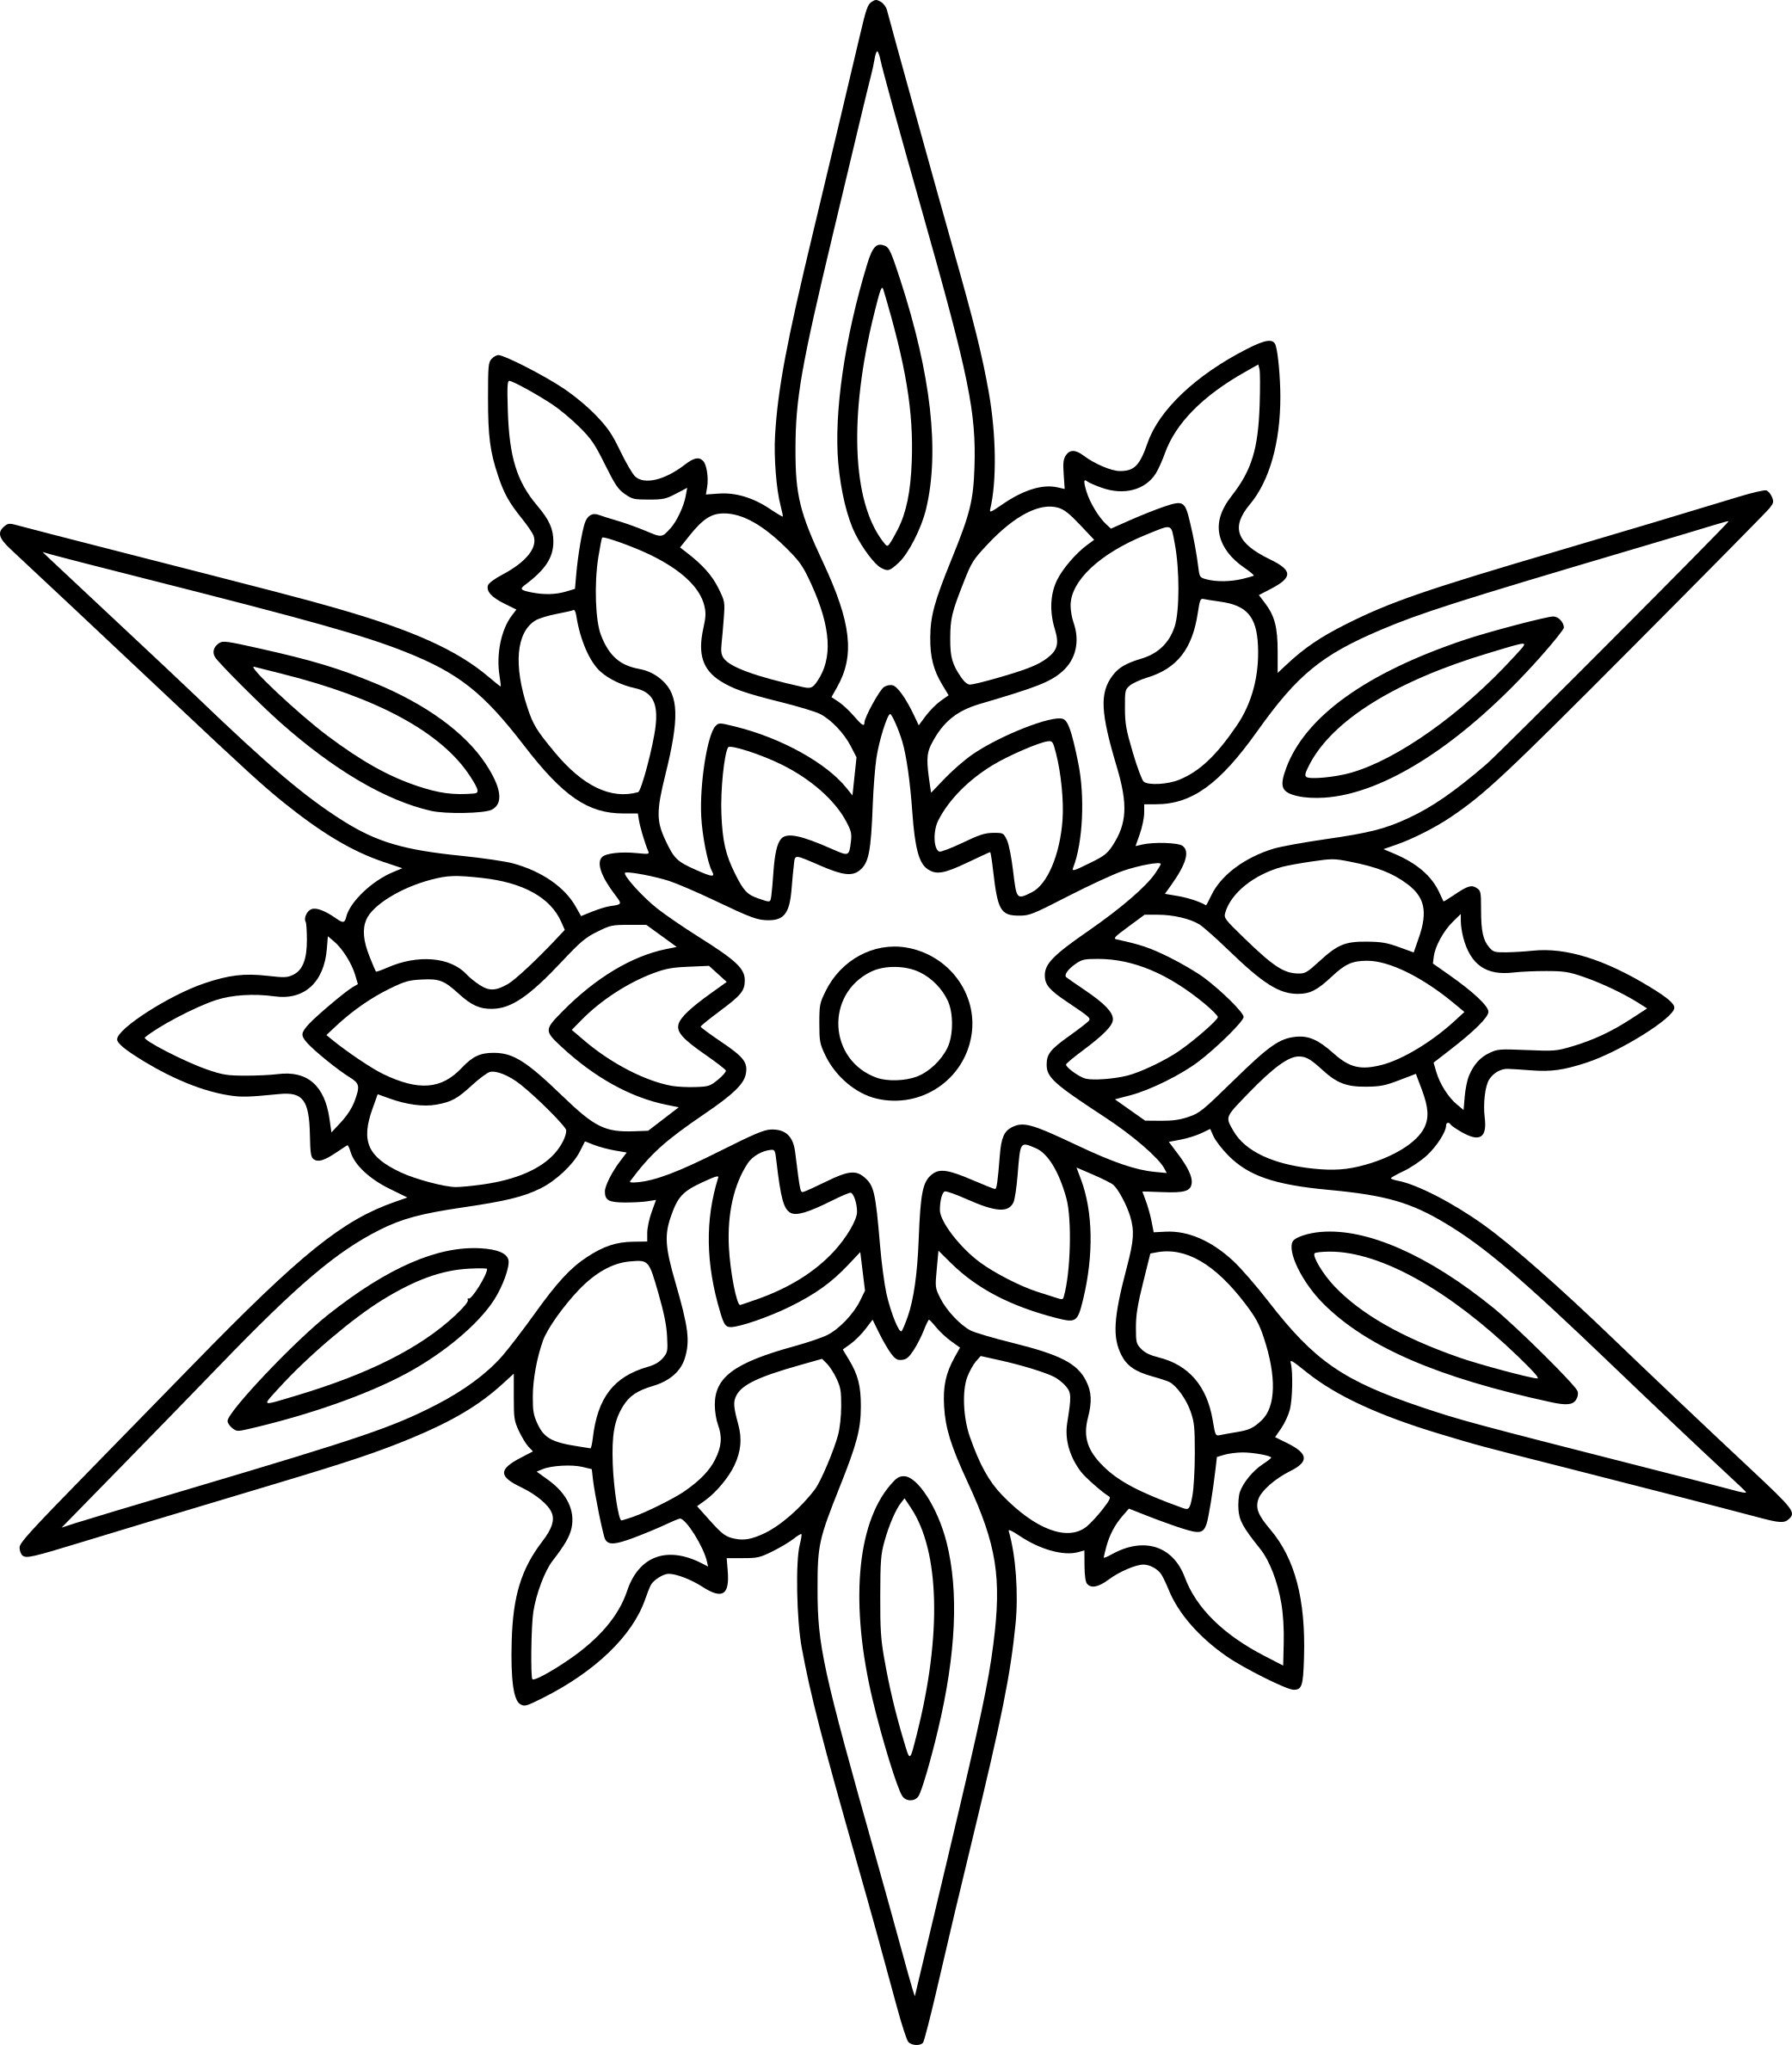 Christmas Star coloring page